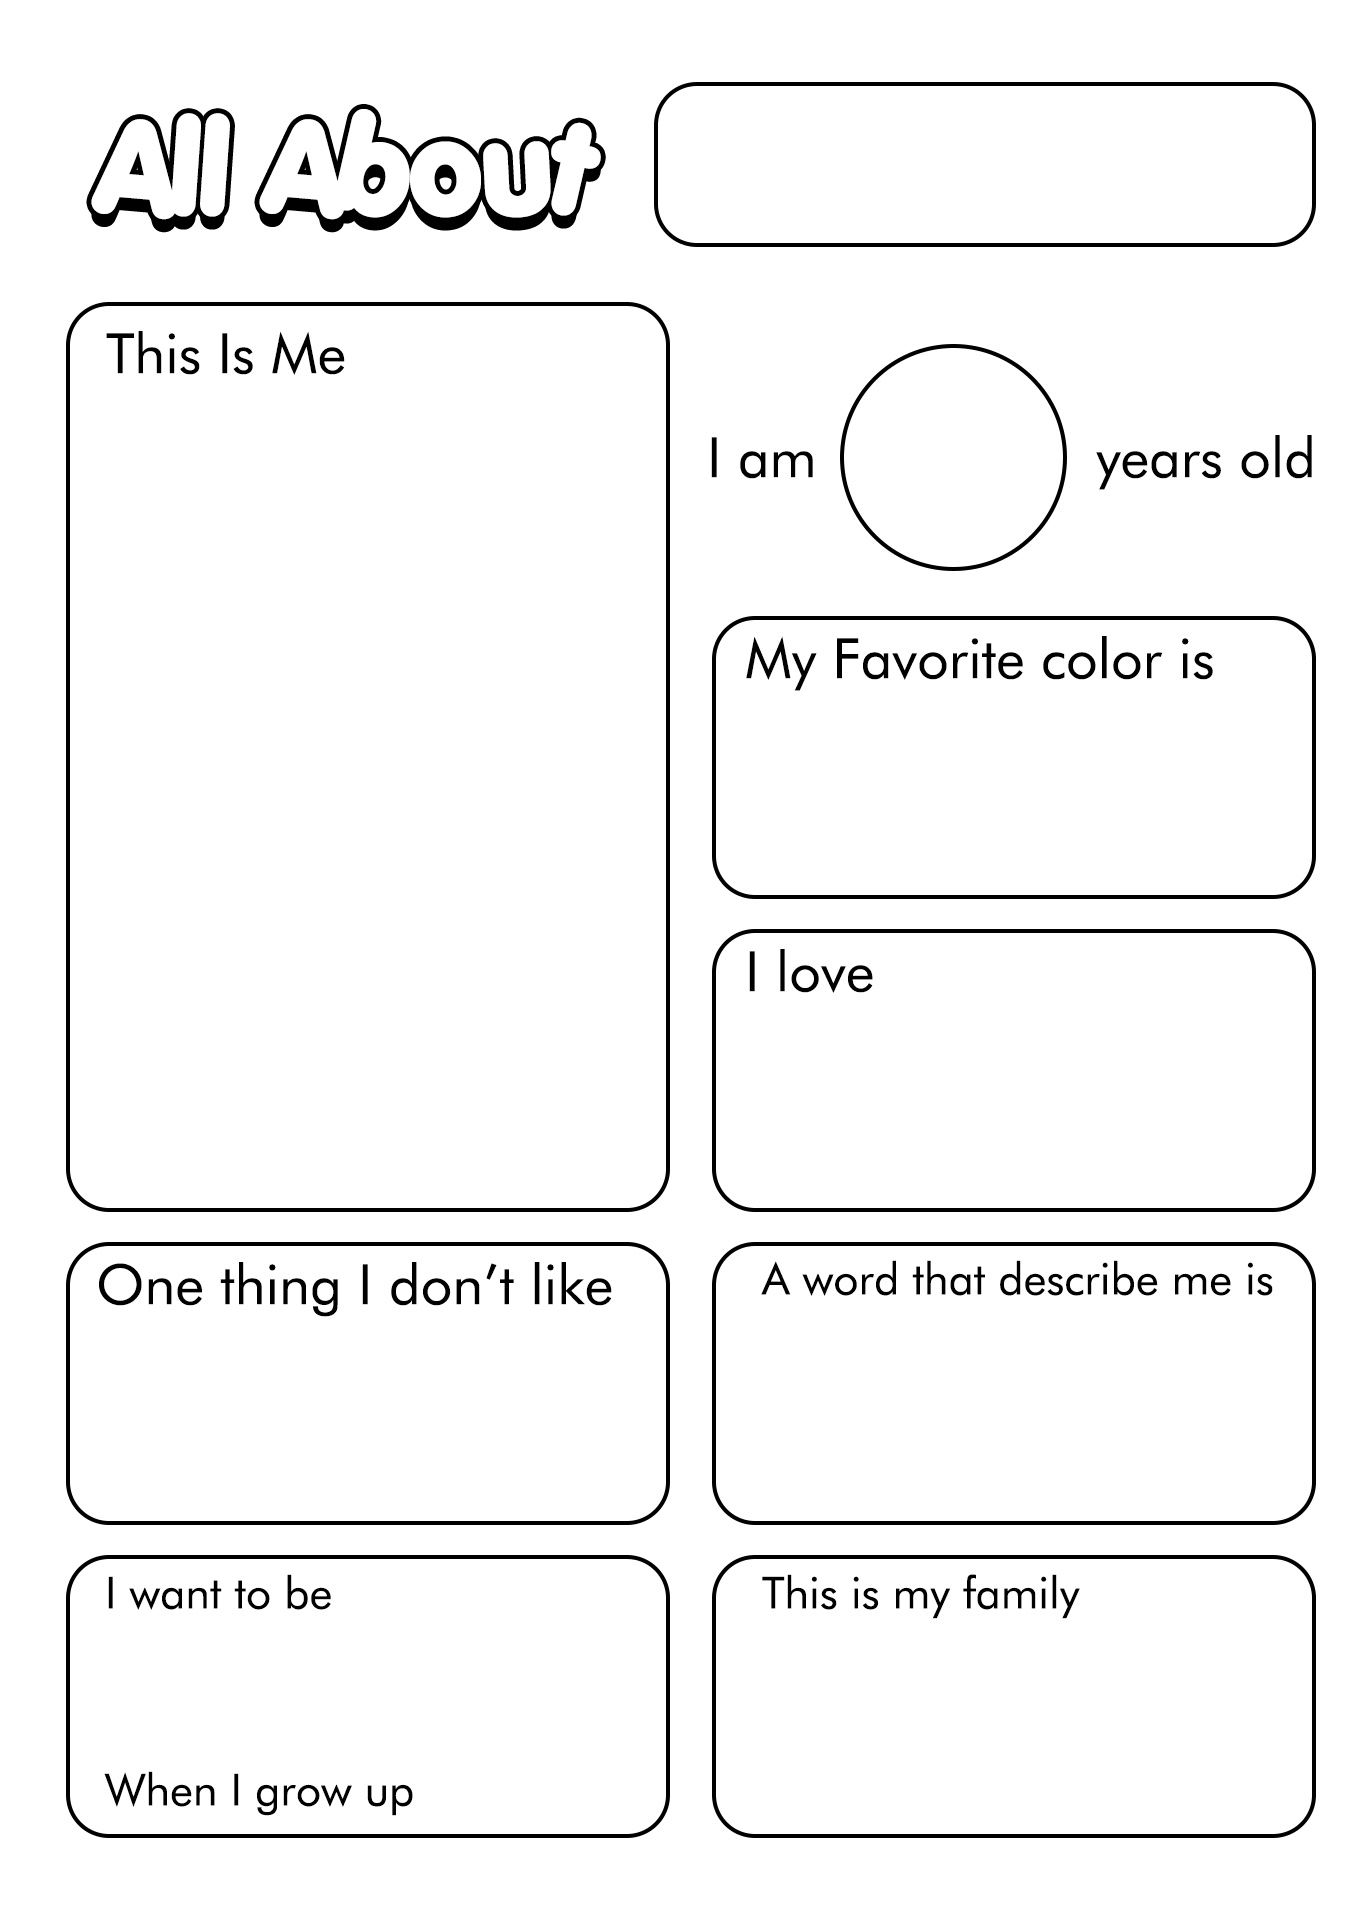 All About Me Printables Image